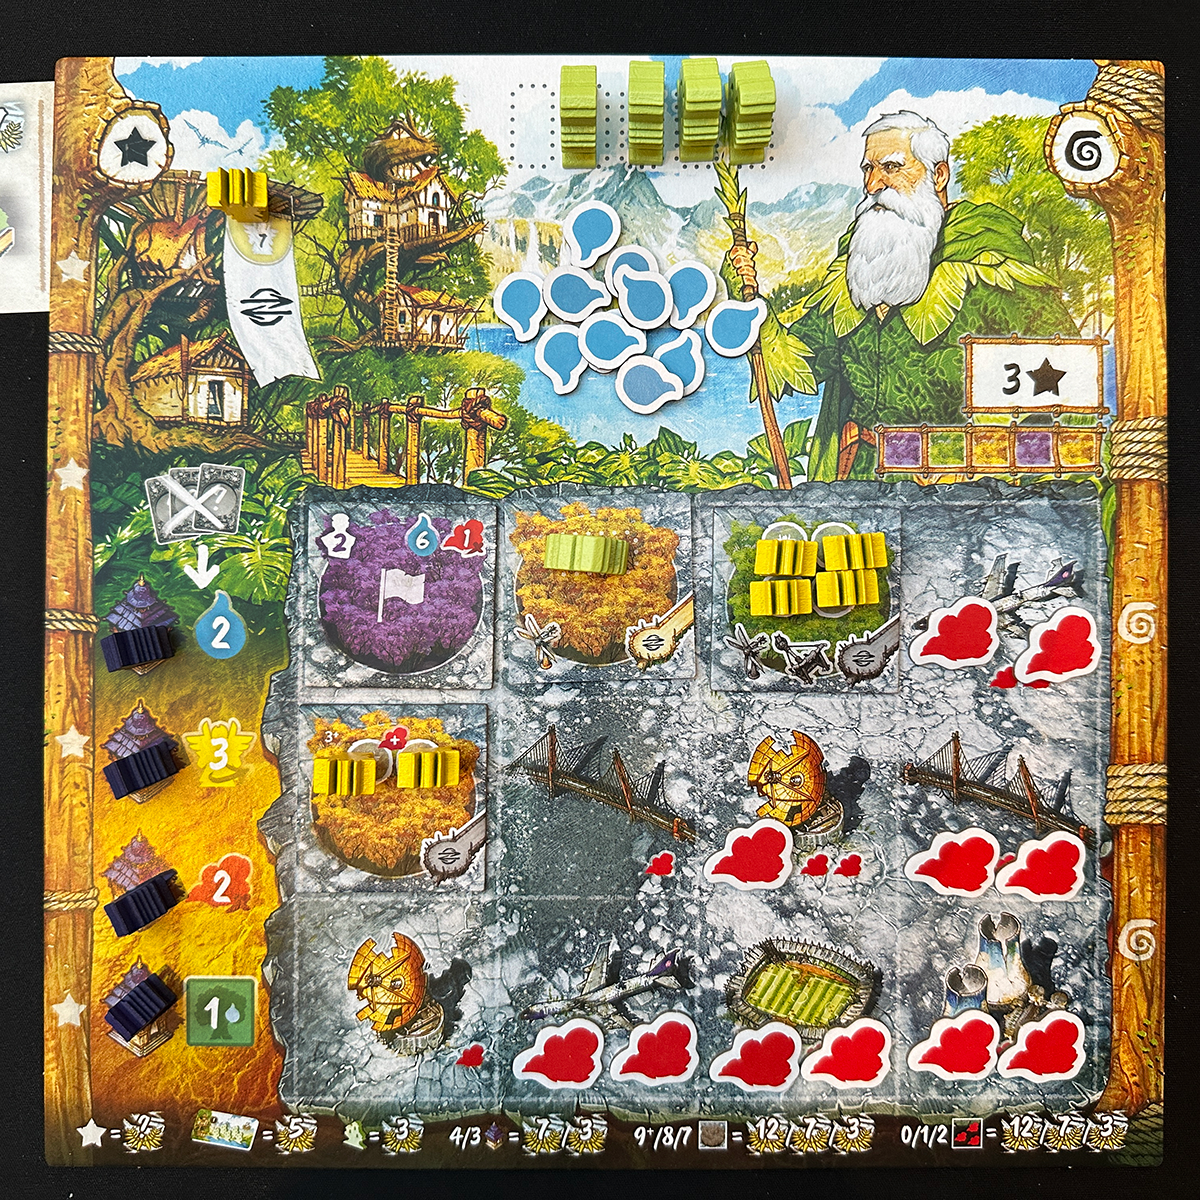 Tribes of the wind player board